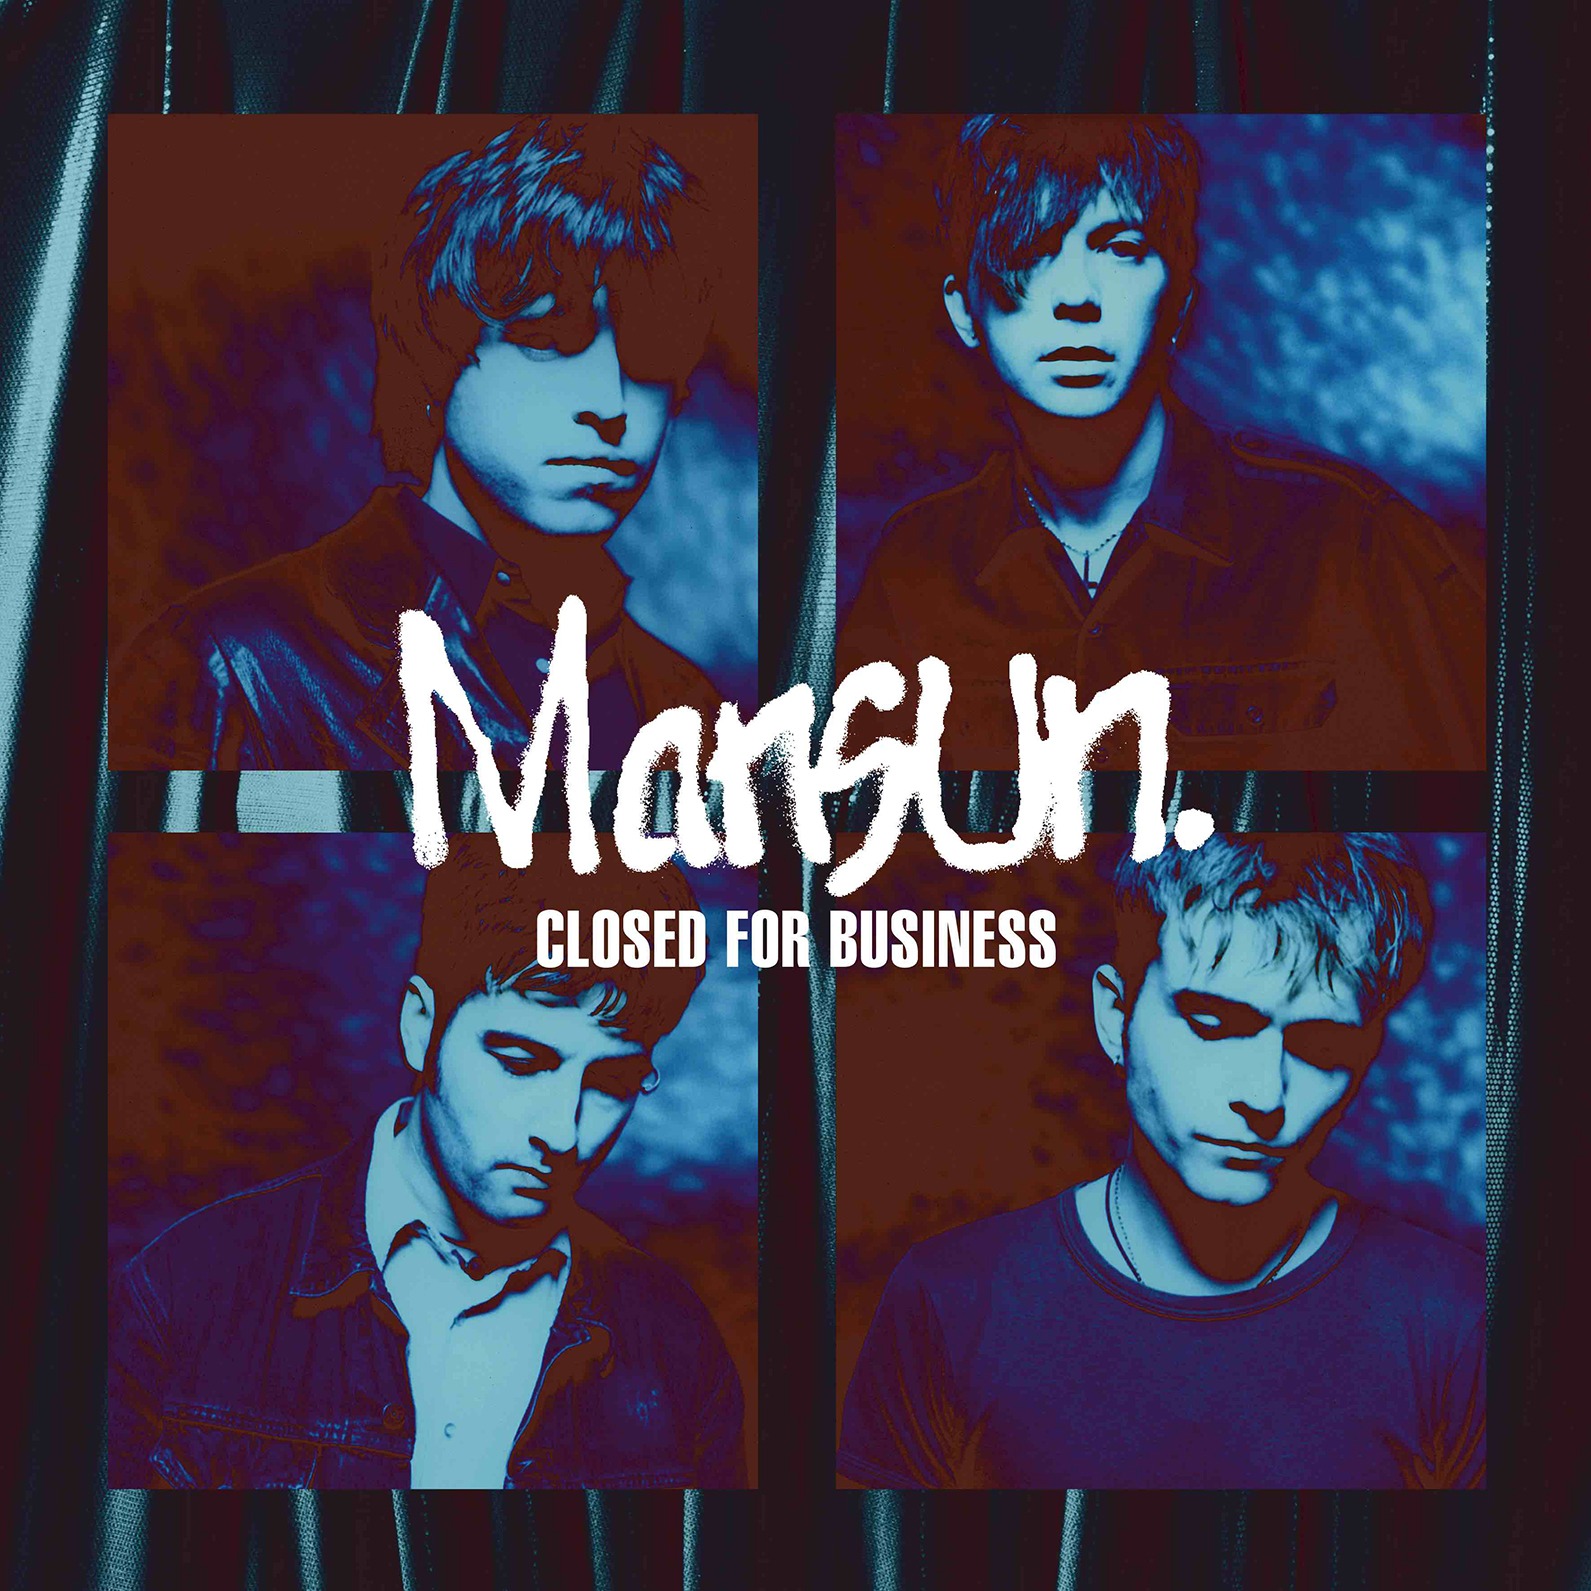 MANSUN Announce ‘Closed For Business’ 25th anniversary deluxe box set - Out 27th November 2020 1